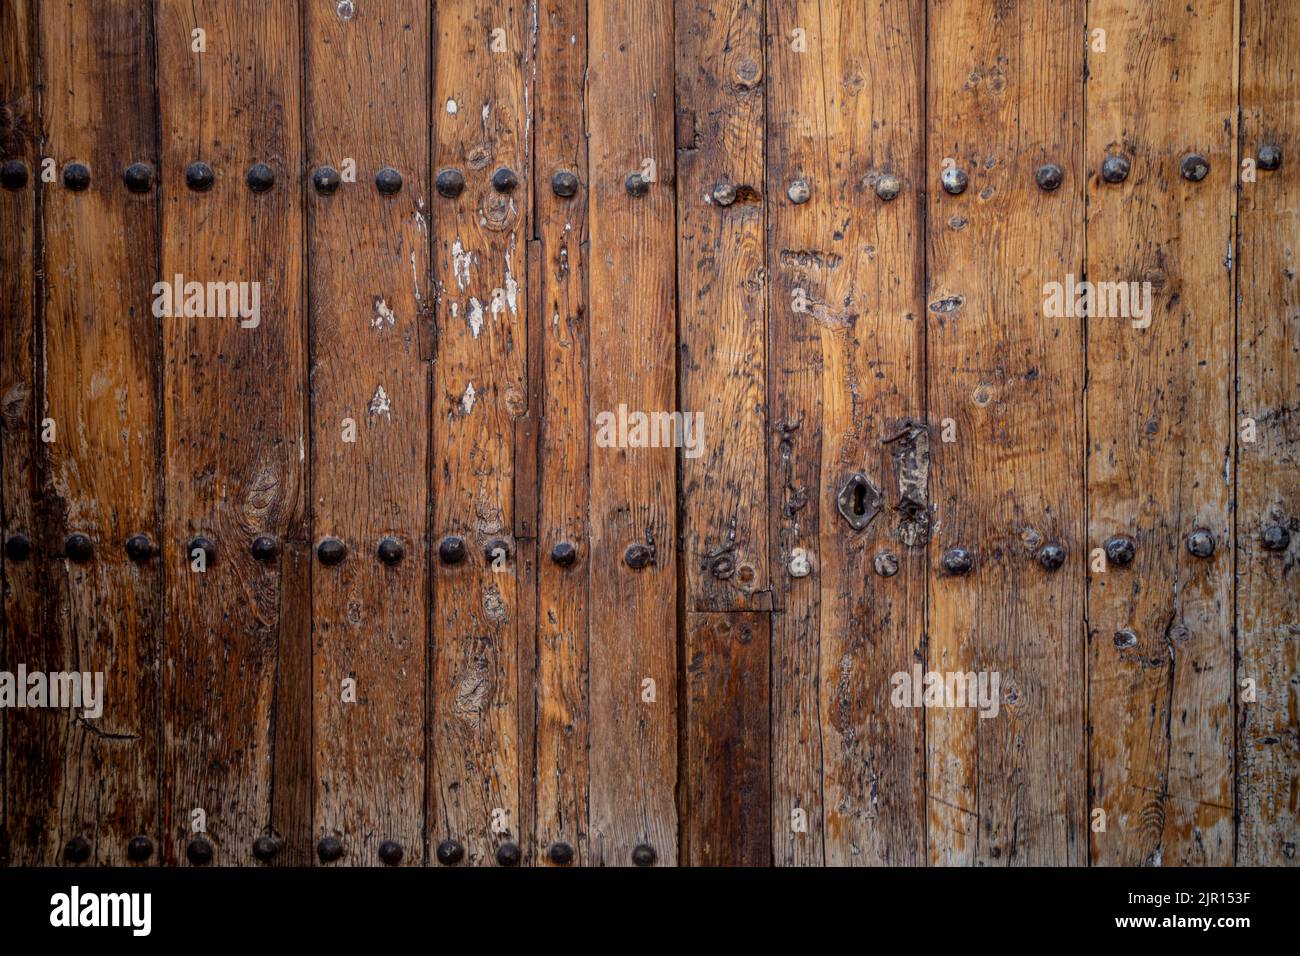 Antique weathered double leaf door with metal knockers and decorations on dark natural wood Stock Photo